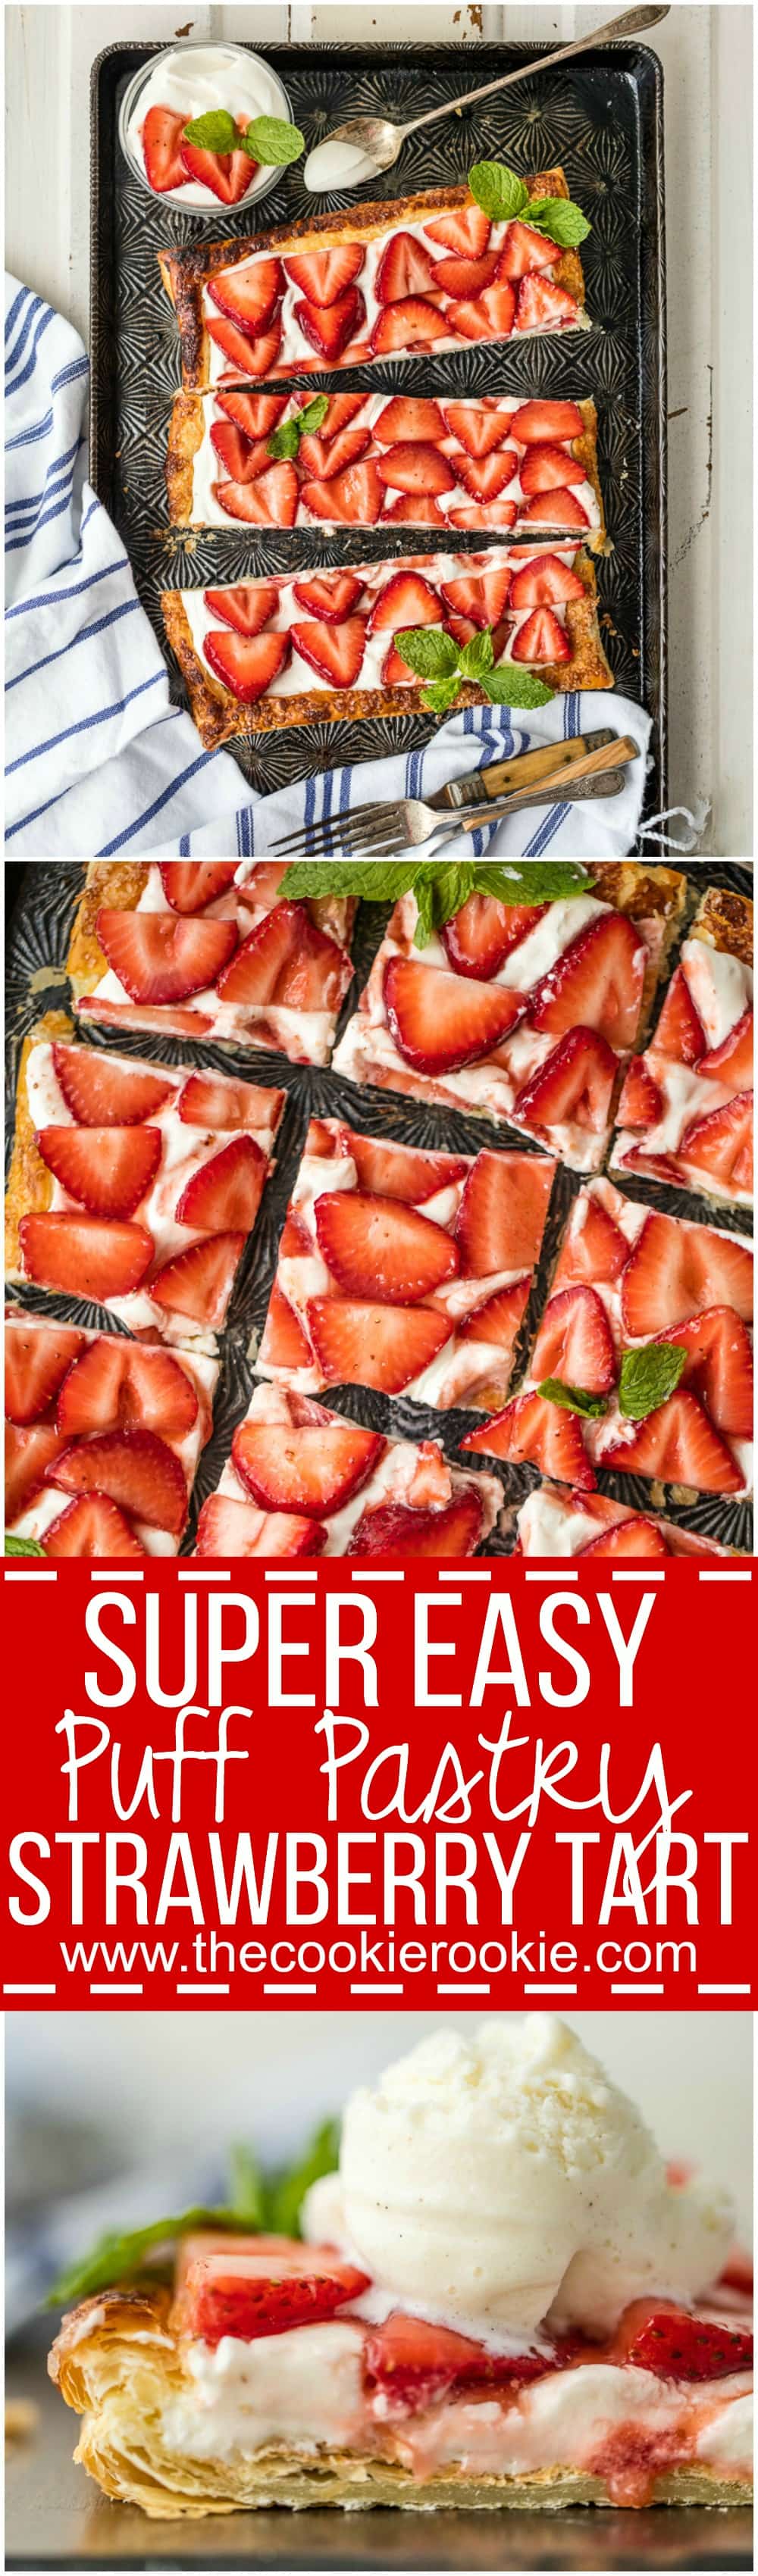 This SUPER EASY PUFF PASTRY STRAWBERRY TART is our favorite simple Summer sweet treat. Made in minutes, it's delicious on its own or topped with vanilla ice cream! I can't get enough!!